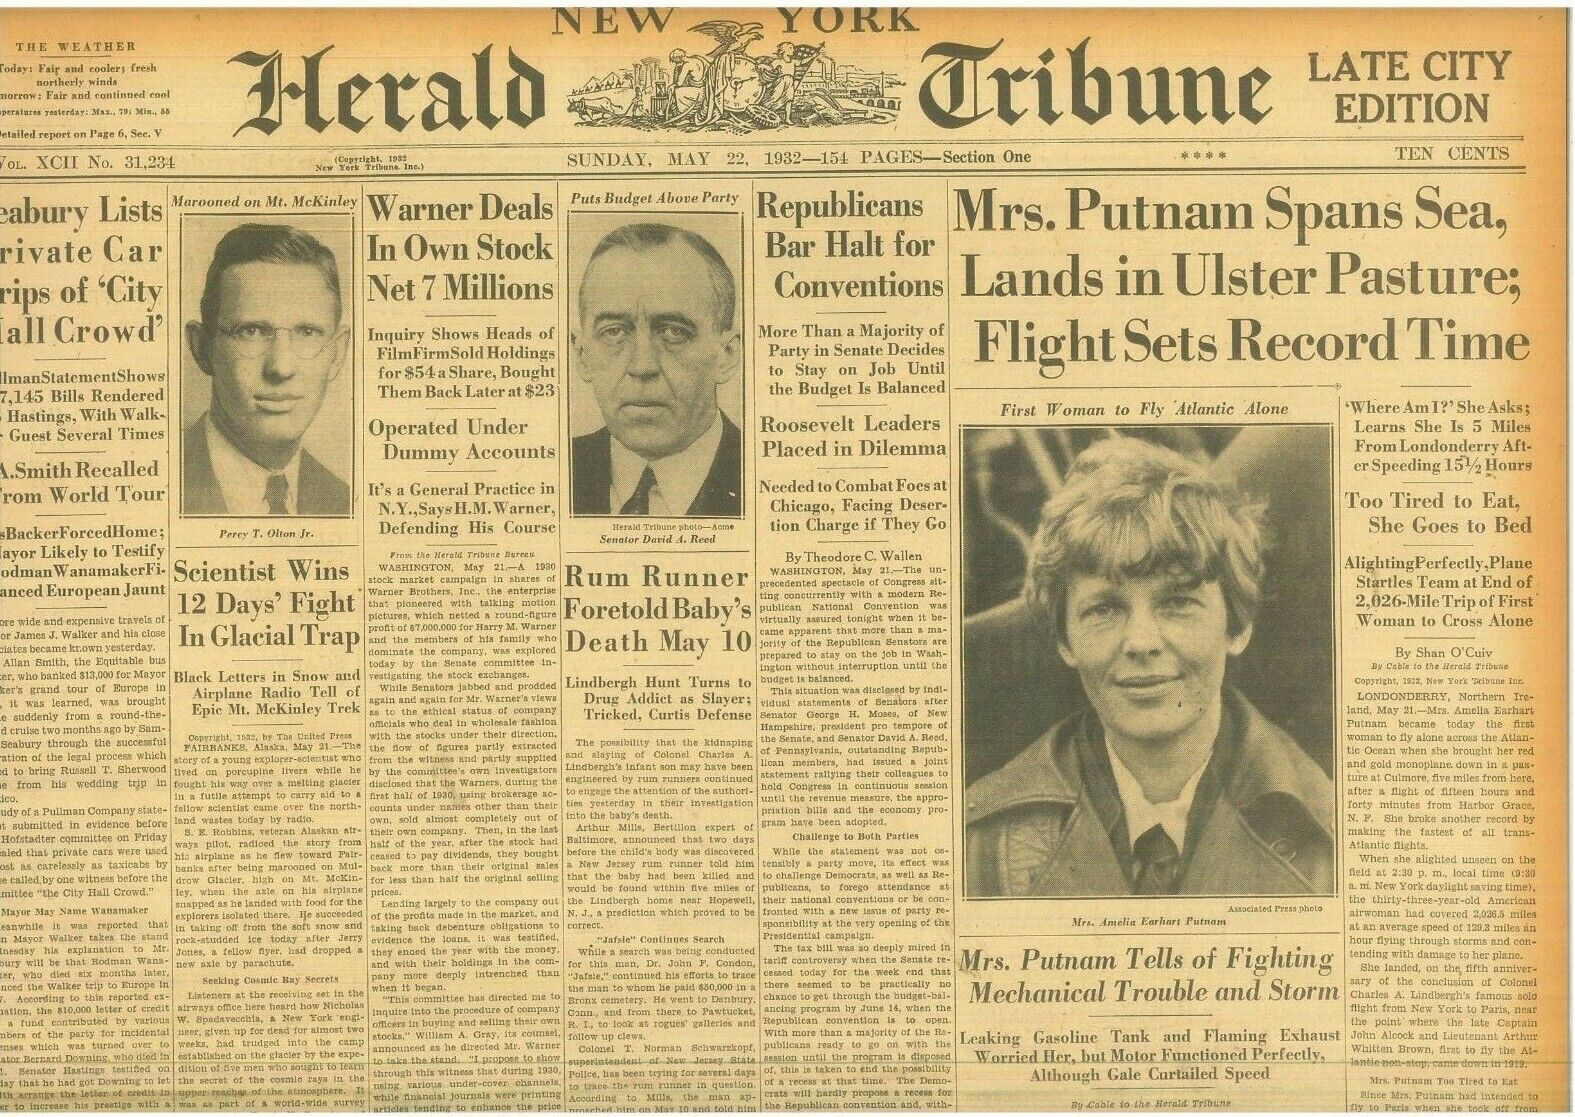 Amelia Earhart First Woman to Fly Atlantic Sets Record Time May 22 1932 WA7